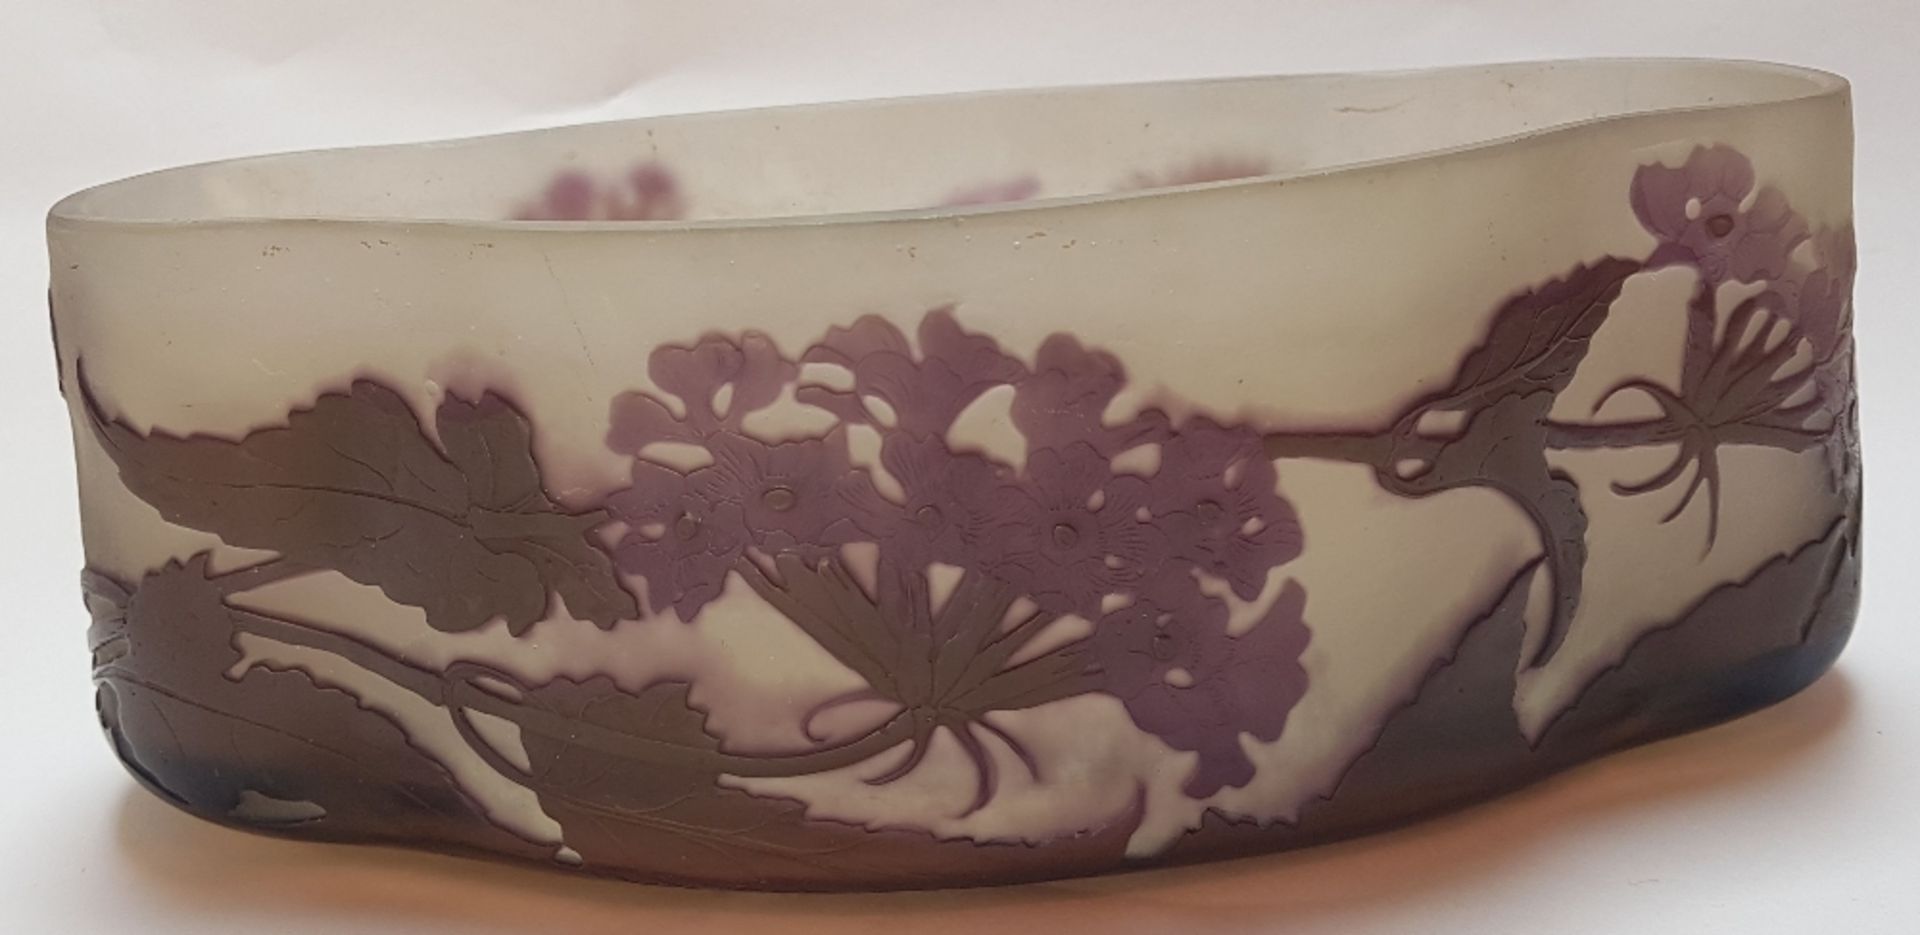 Emile Galle (1846-1904)Hydrangeas; Thick double-walled glass bowl with violet décor deeply etched in - Image 3 of 3